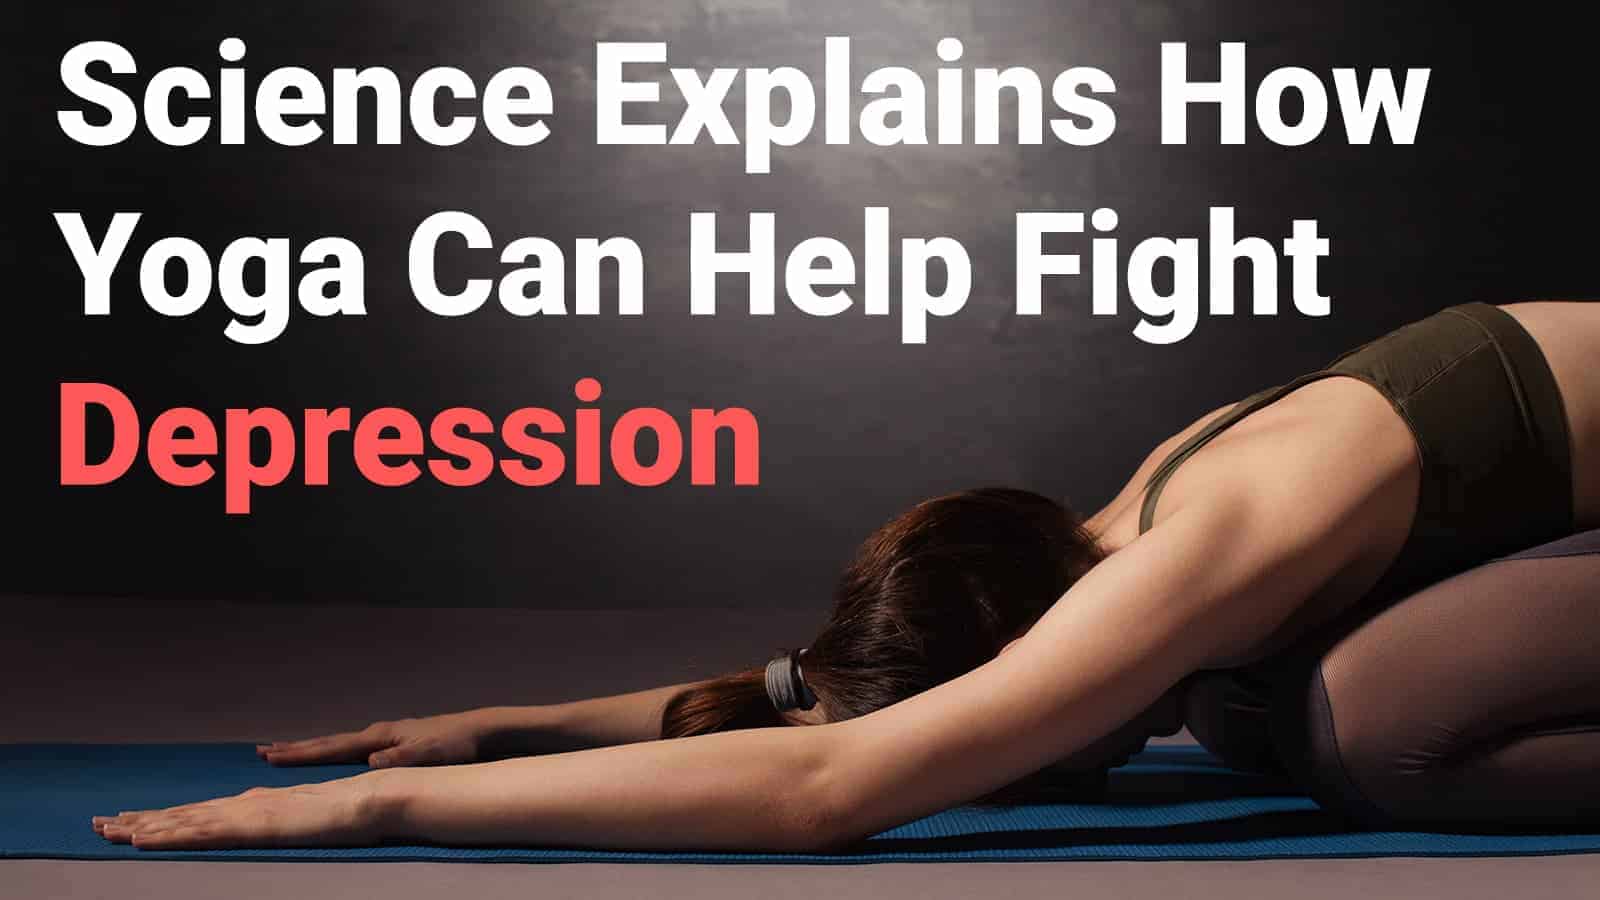 Science Explains How Yoga Can Help Fight Depression